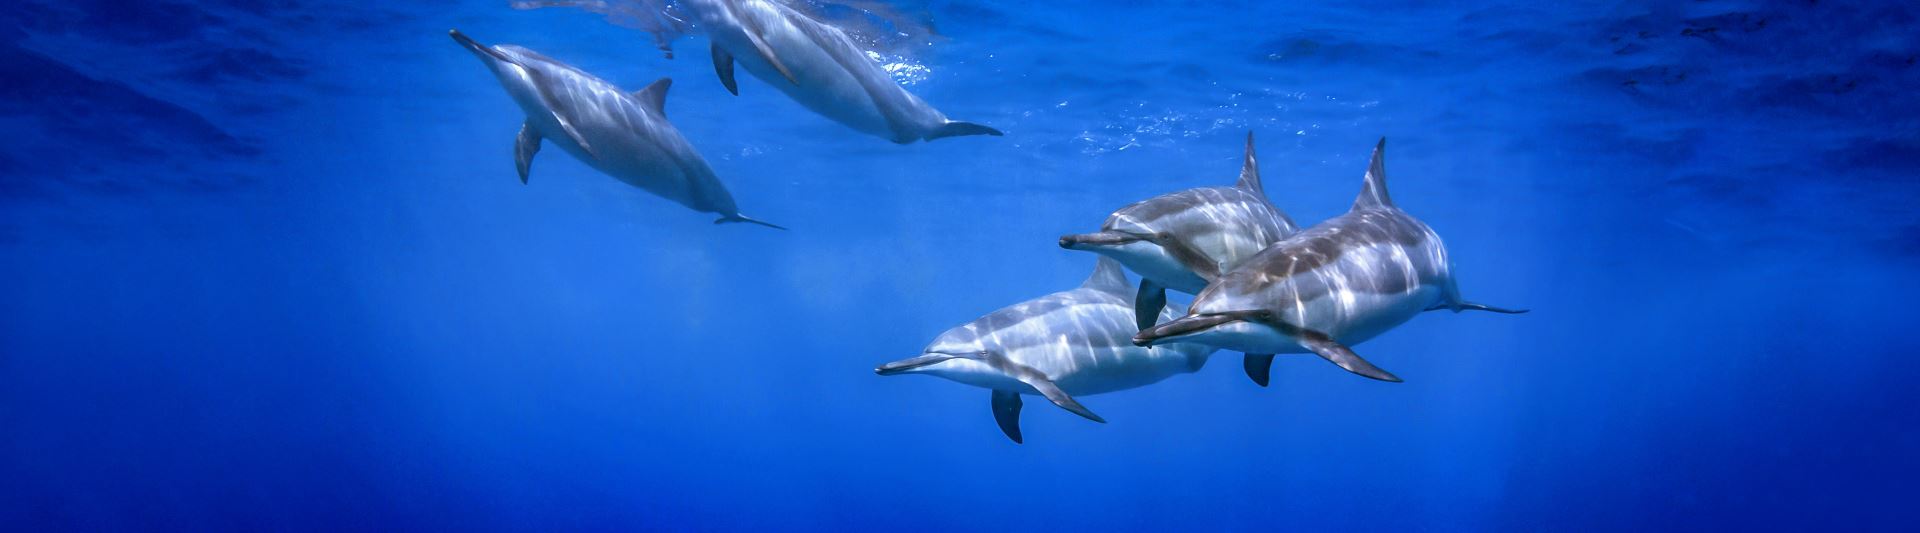 DynamicGroup-Title-Dolphins